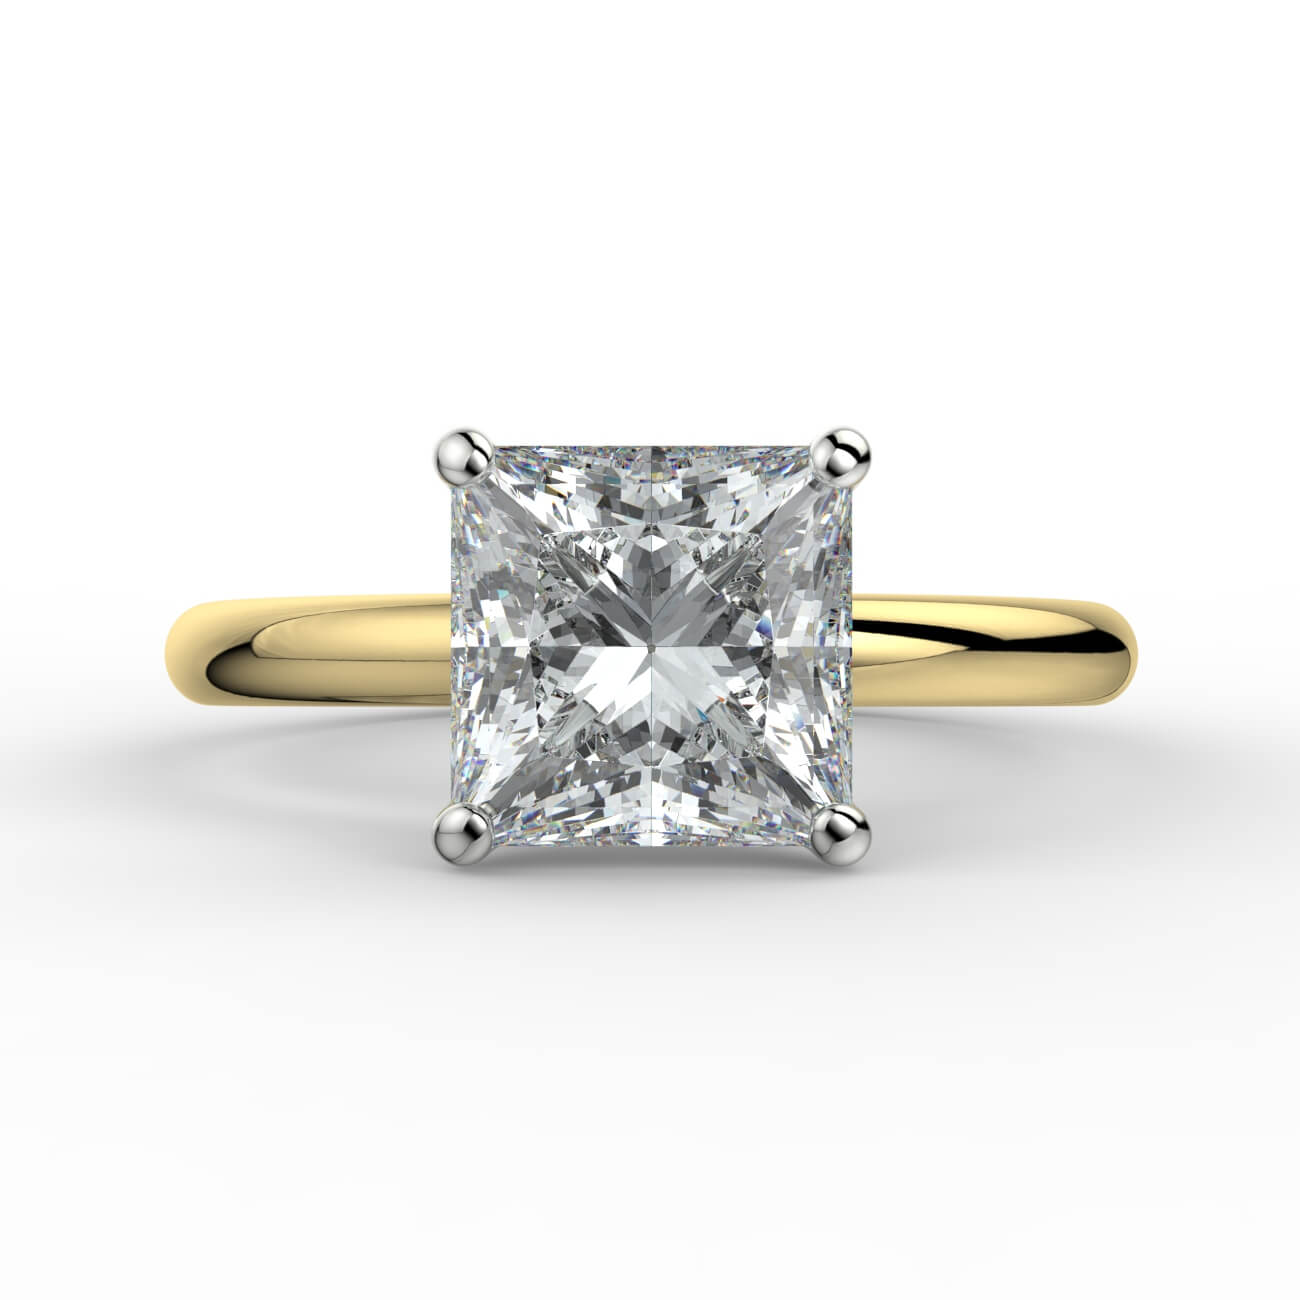 Comfort fit 4 claw princess cut solitaire diamond ring in white and yellow gold – Australian Diamond Network